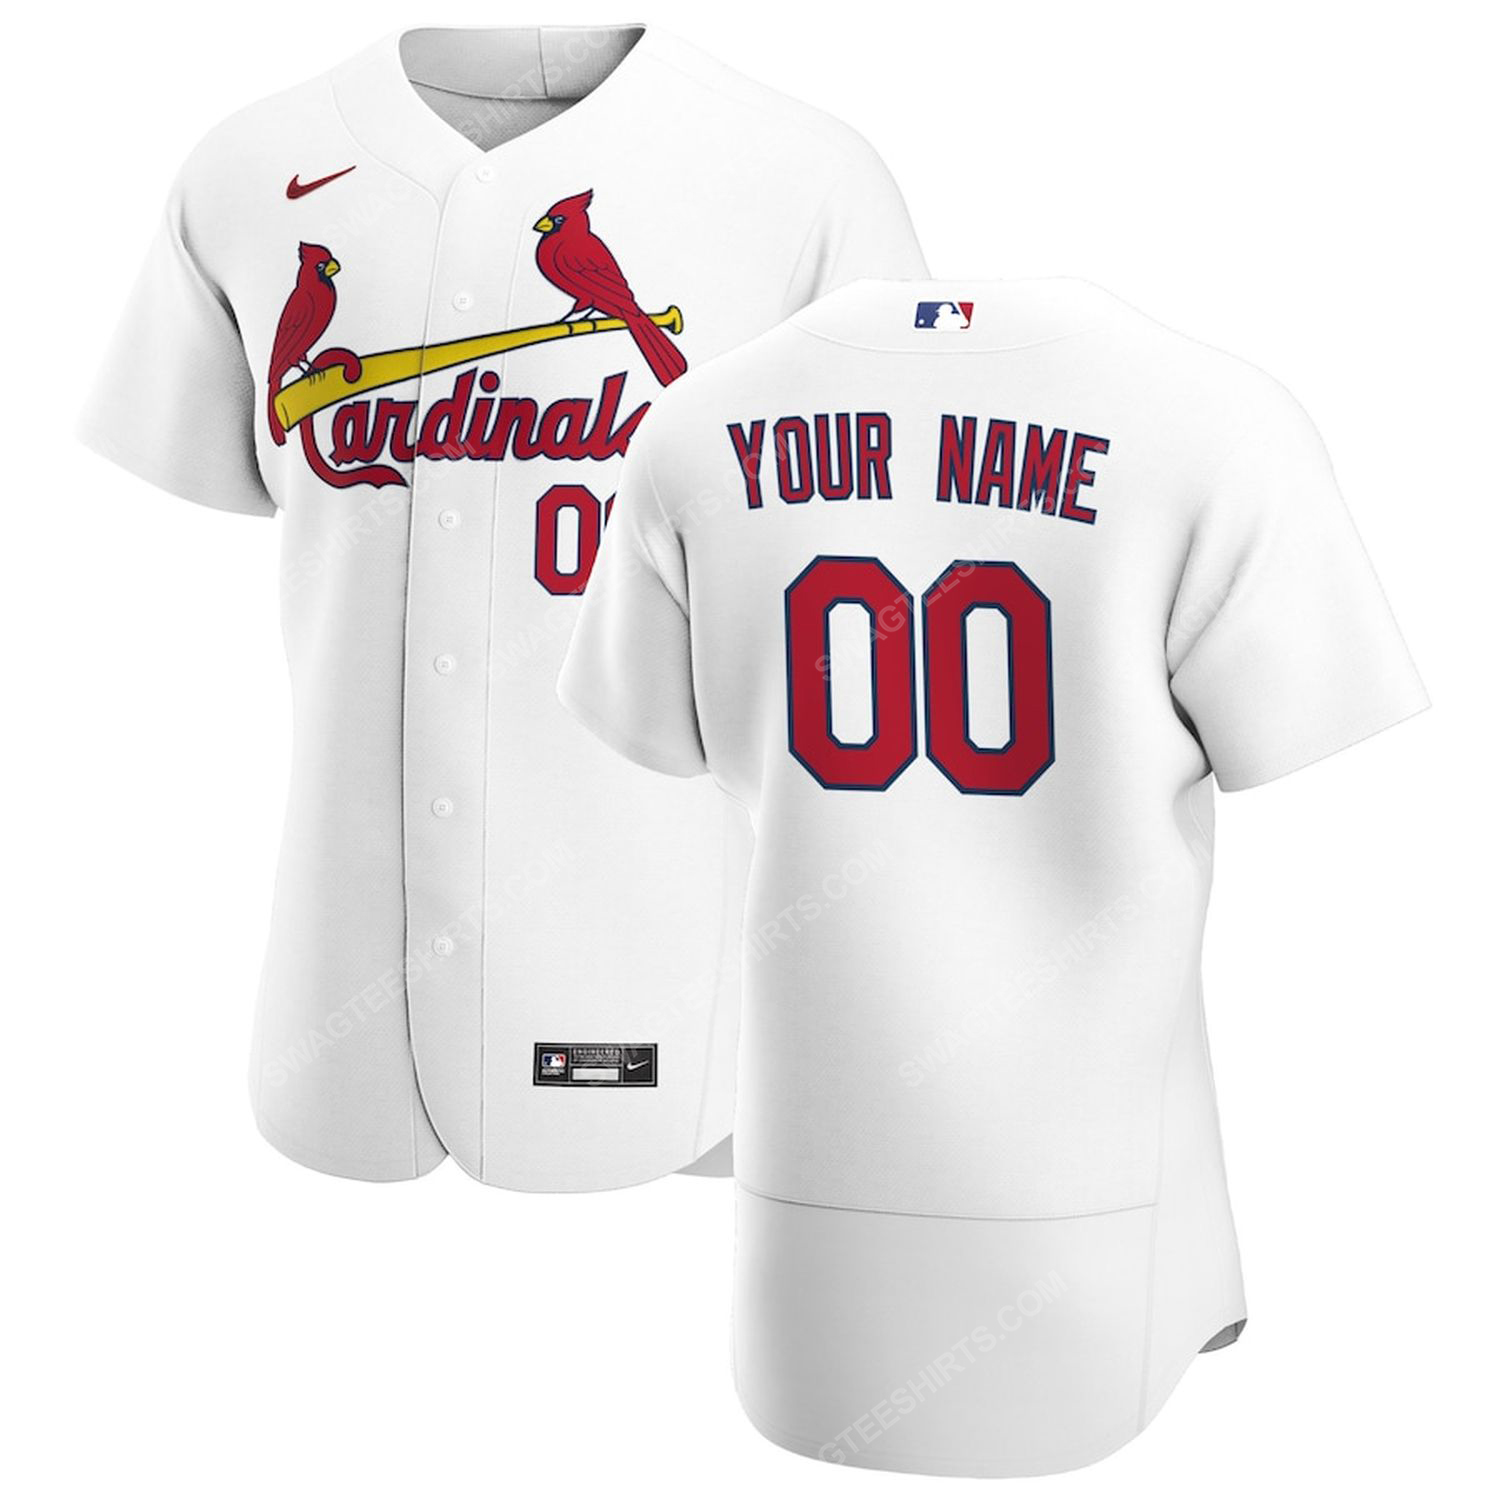 [special edition] Personalized mlb st louis cardinals team baseball jersey – maria